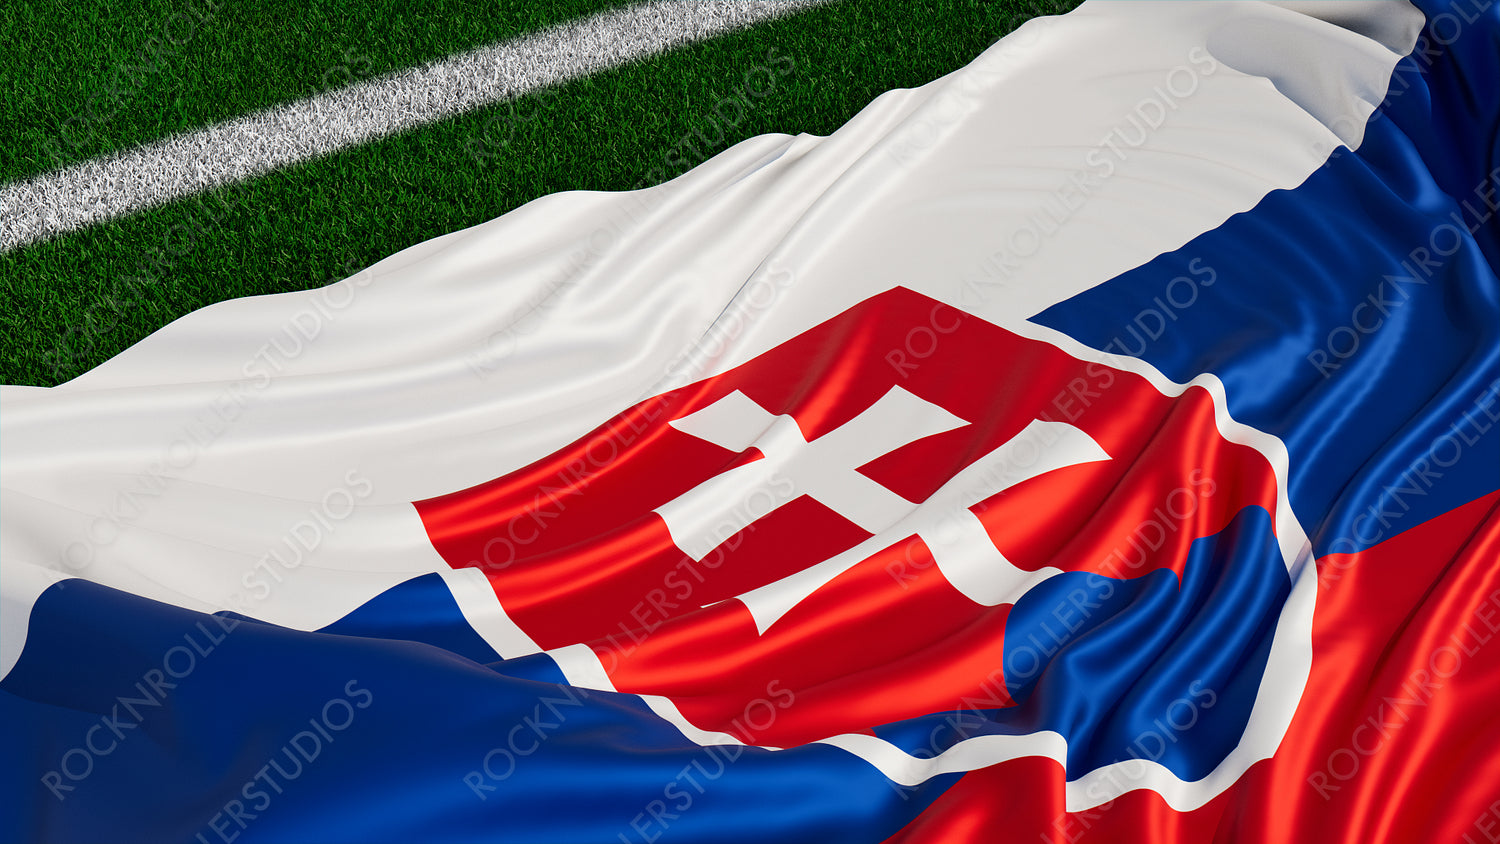 Flag of Slovakia on a Sports field. Grass Pitch with a Slovakian Flag. Euro 2020 Soccer Wallpaper.